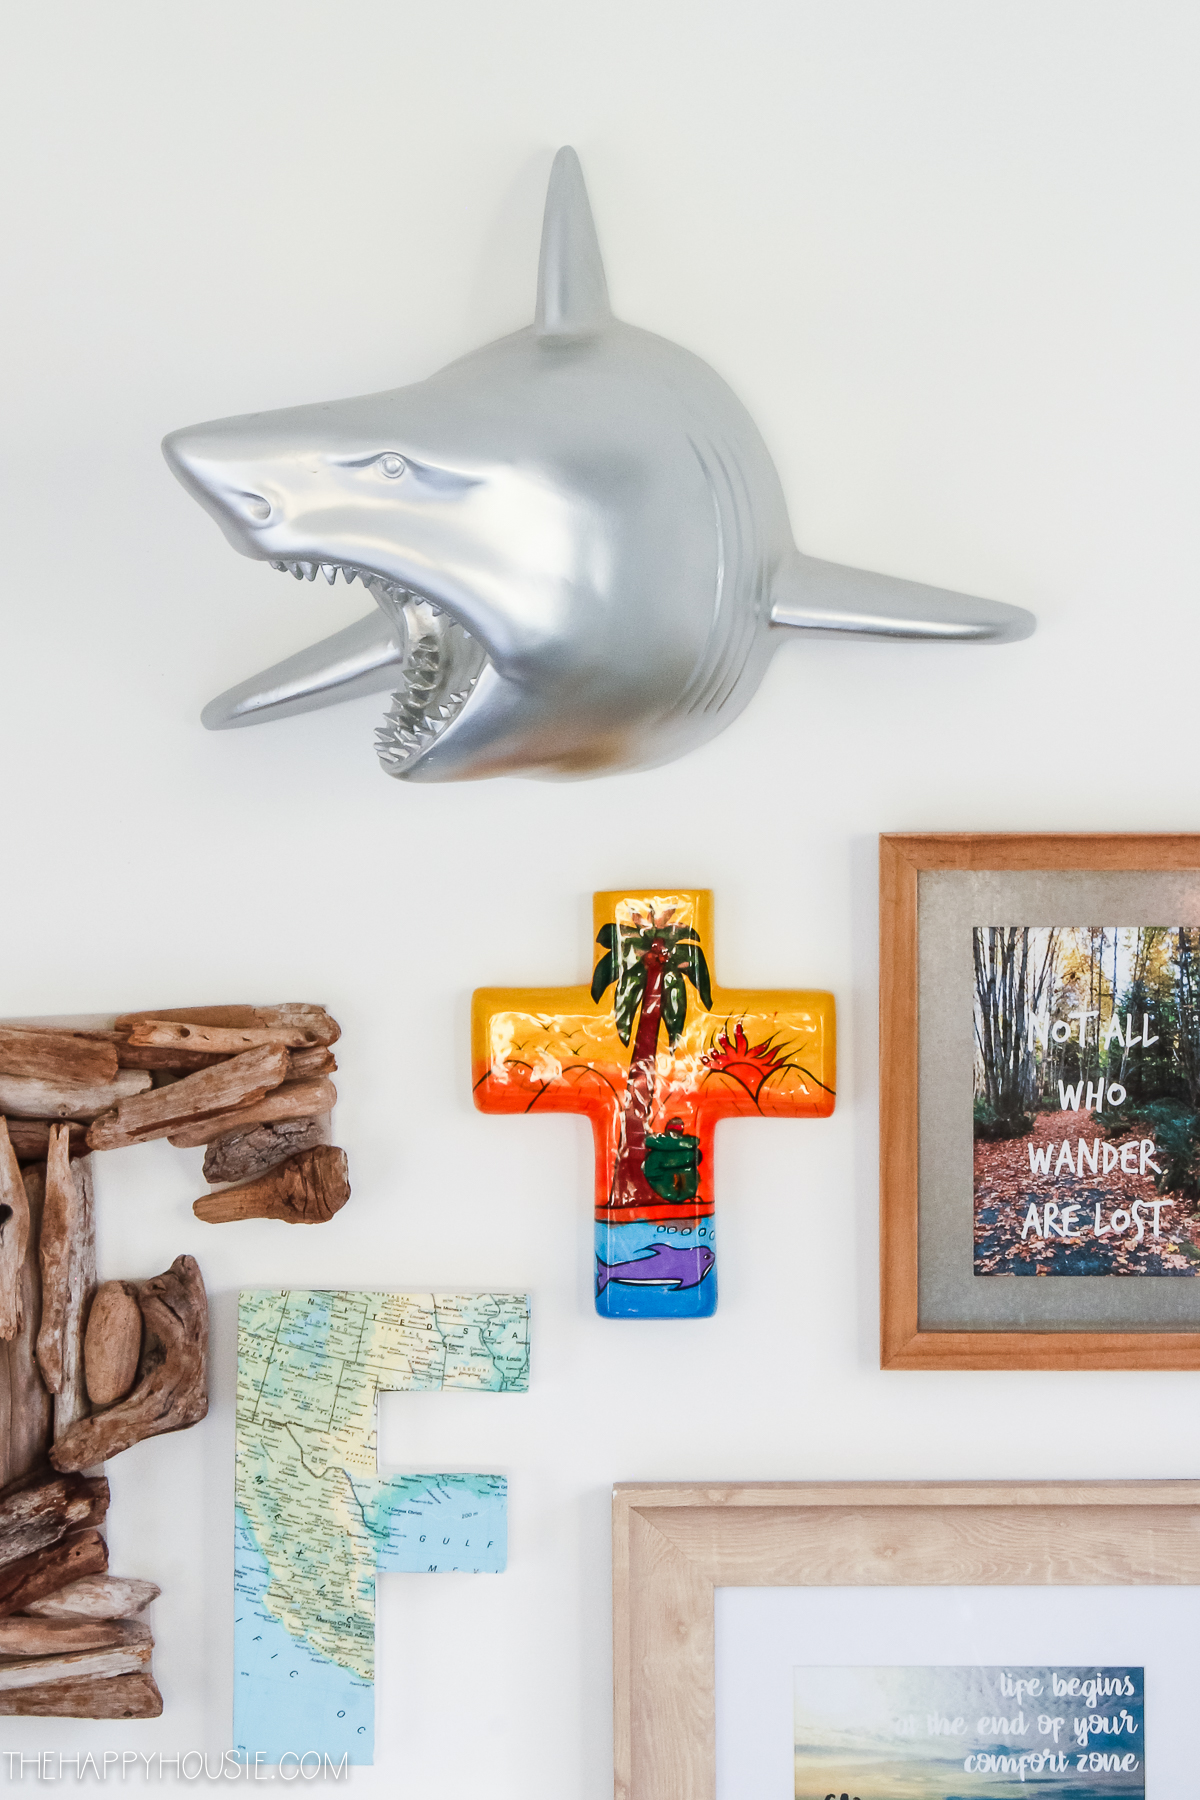 A large silver shark is on the wall.